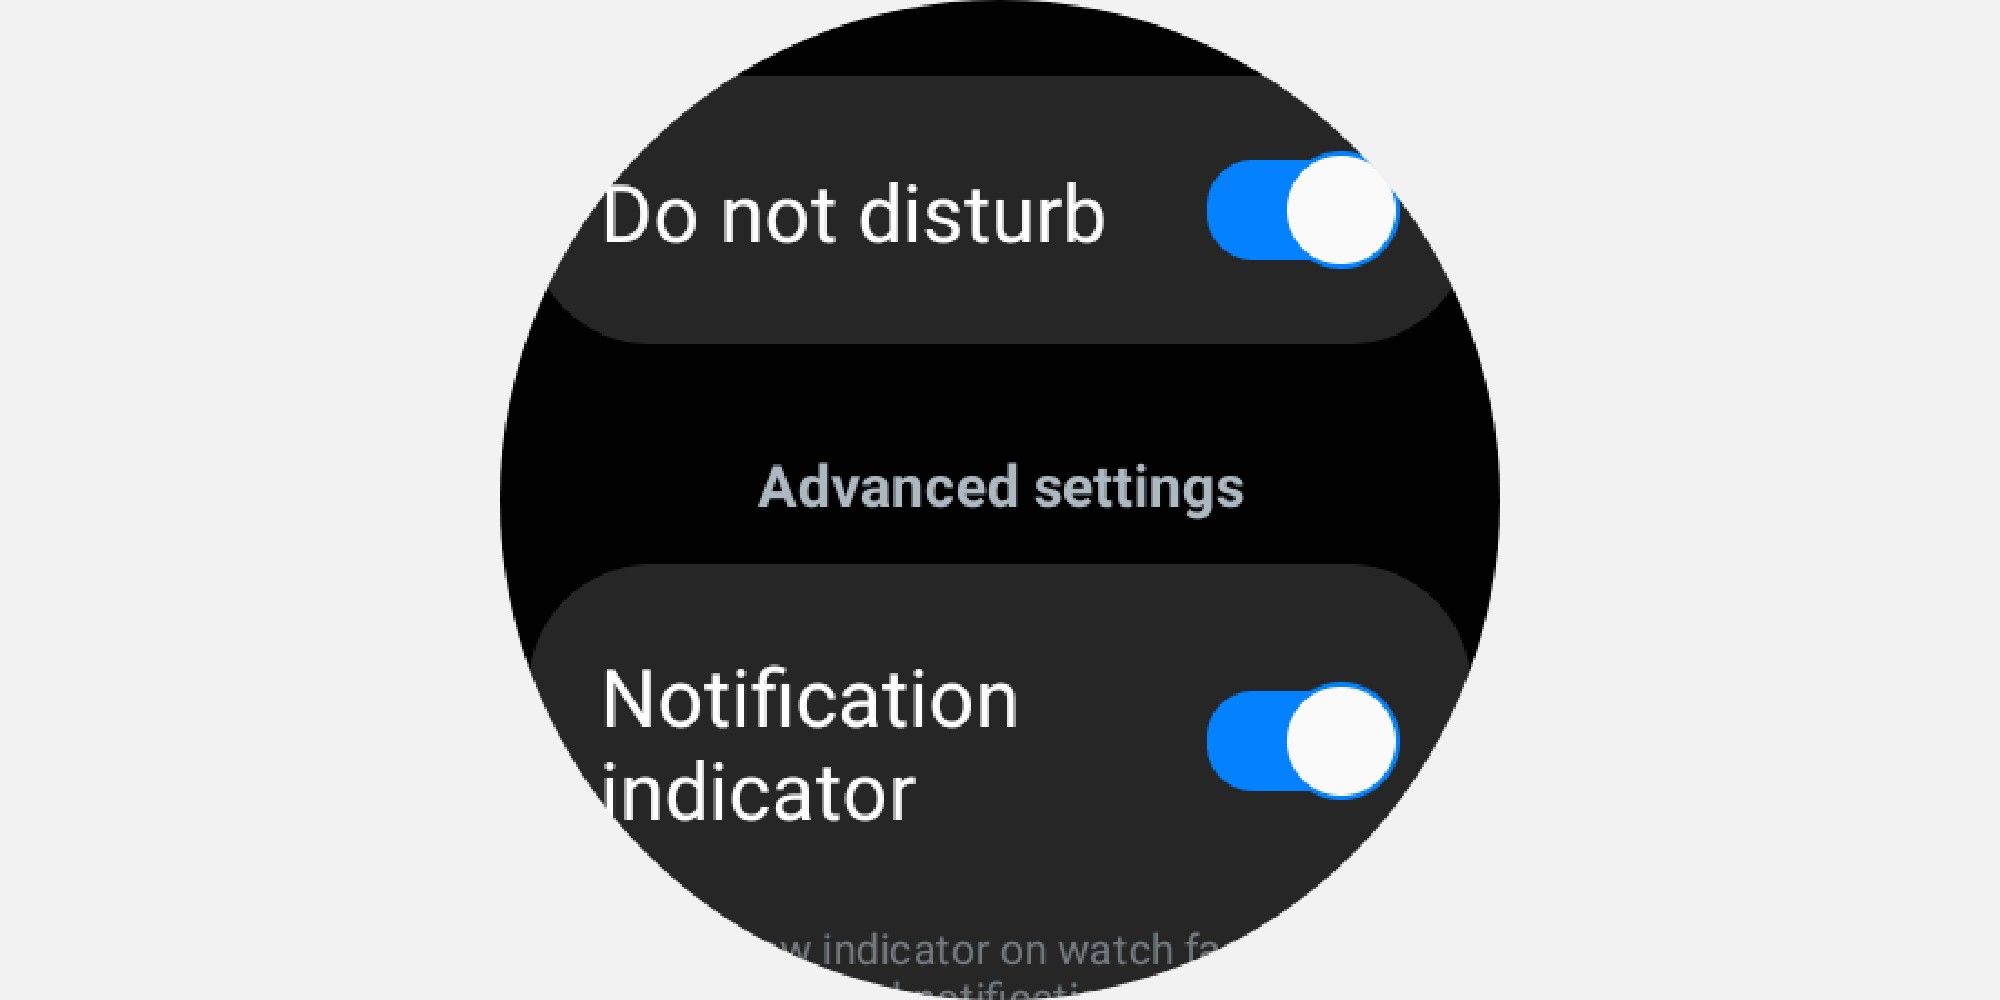 Setting up the DND mode on your smartwatch